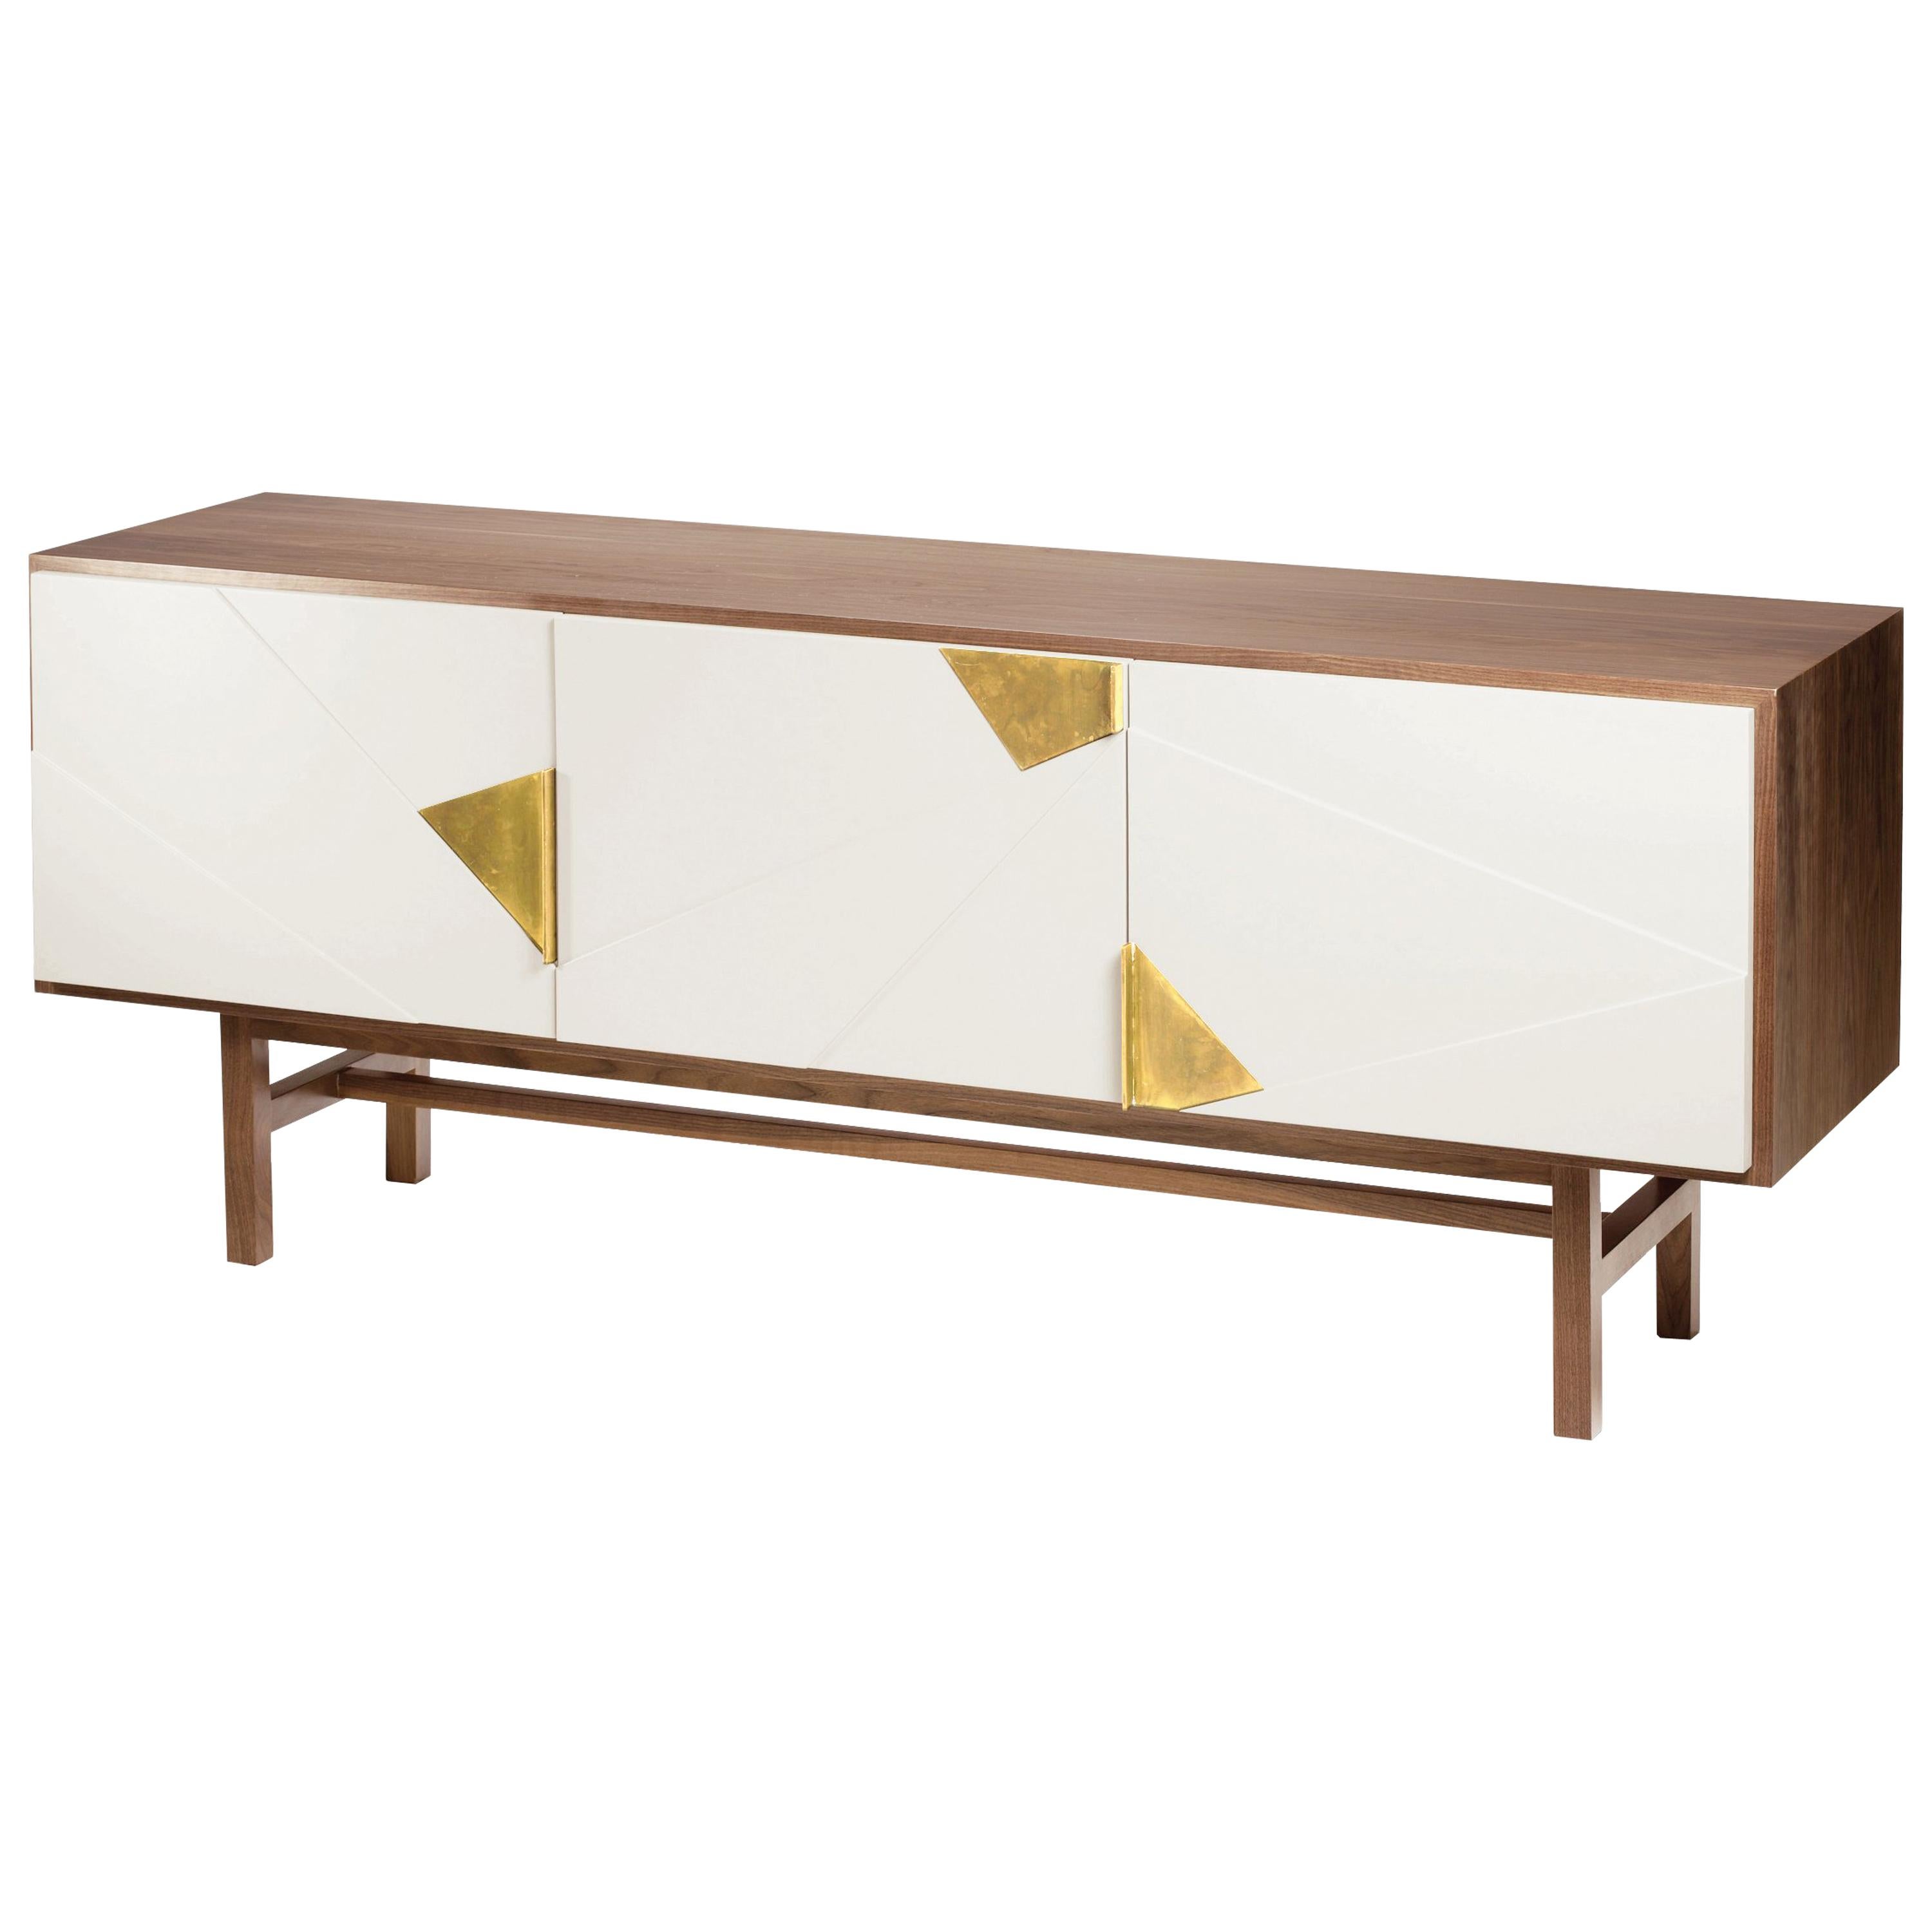 Sideboard Jazz in Walnut Wood, Brass and Lacquer